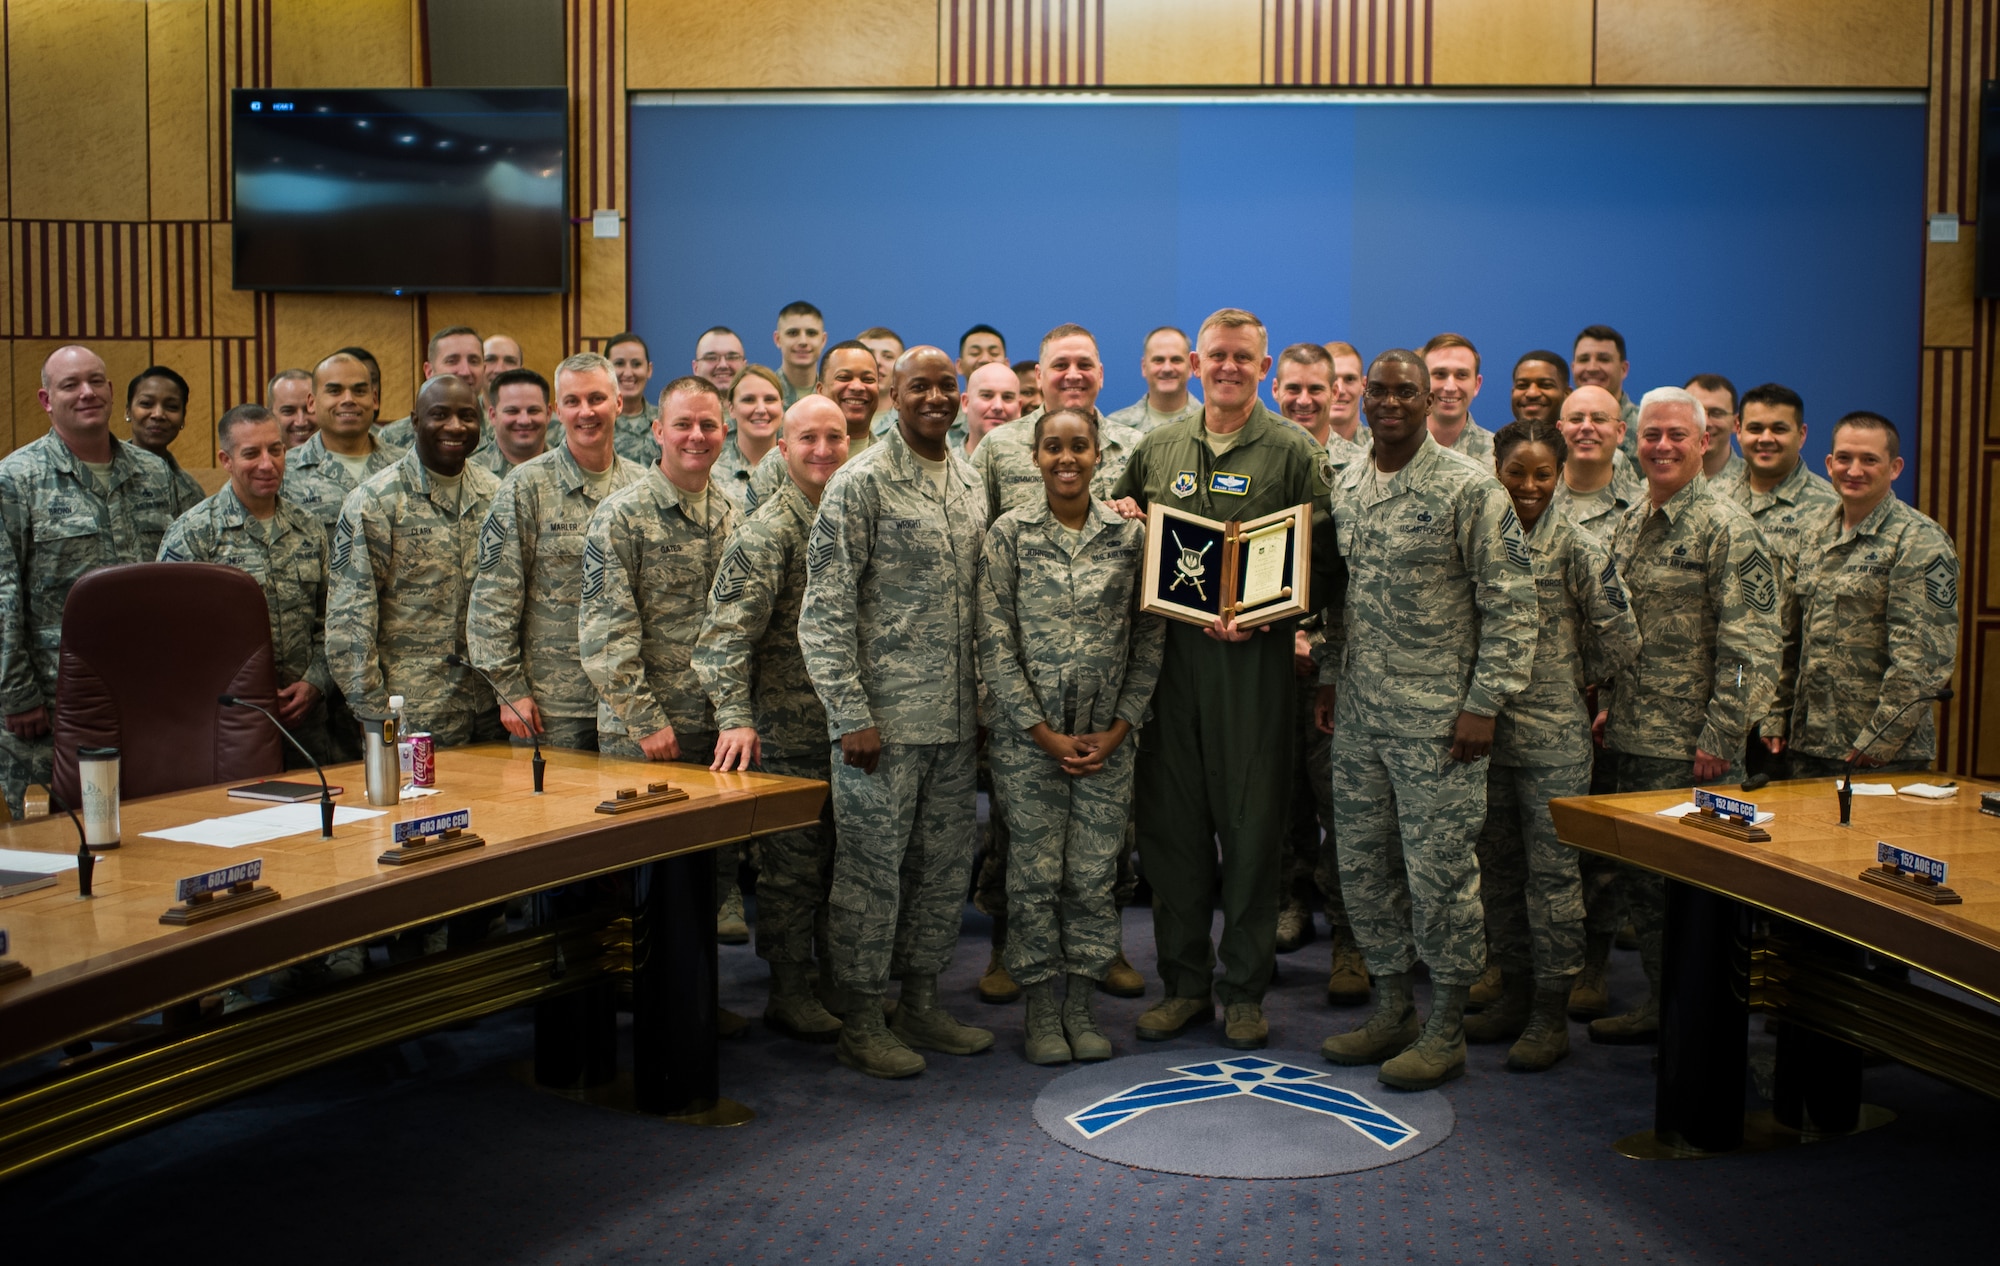 General Frank Gorenc, U.S. Air Forces in Europe and Air Forces Africa commander, poses for a group photo with command chiefs and enlisted Airmen from across USAFE-AFAFRICA after being nominated for induction into the USAFE-AFAFRICA Order of the Sword at Ramstein Air Base, Germany Oct. 29, 2015. The Order of the Sword is an honor within the U.S. Air Force. It is a program which non-commissioned officers of a command recognize individuals they hold in high esteem and wish to honor. (U.S. Air Force photo/ Tech. Sgt. Ryan Crane)